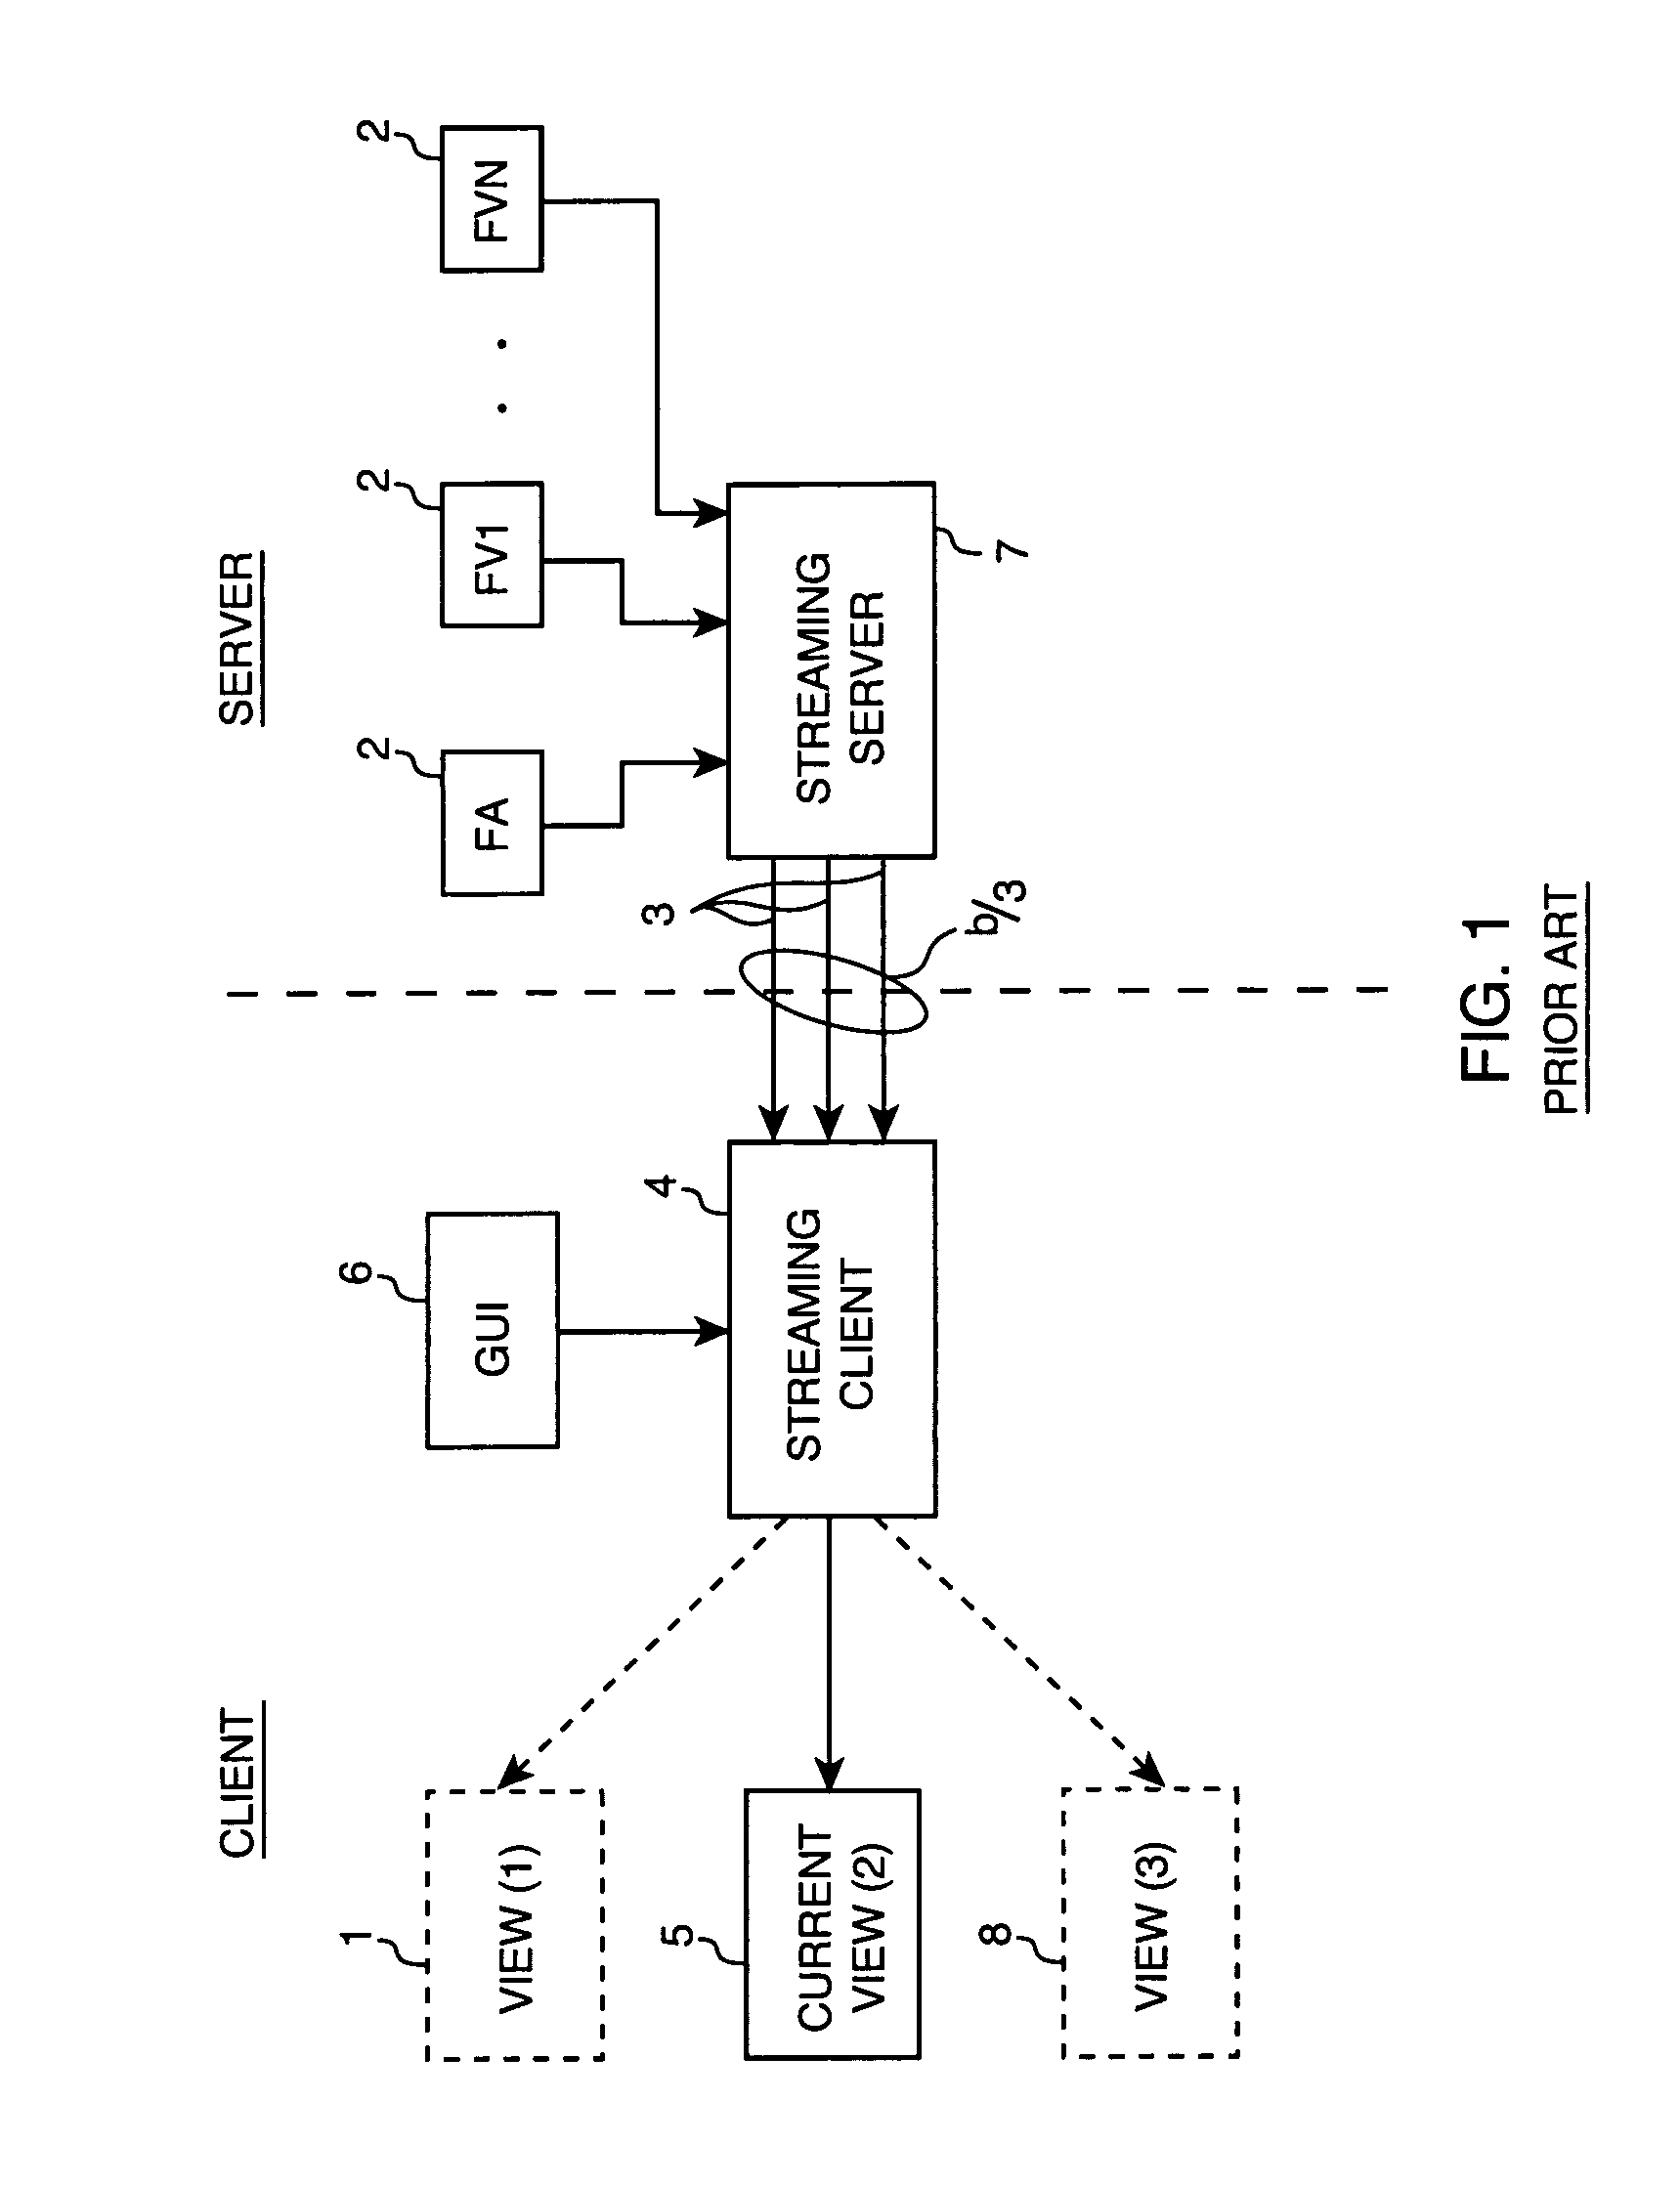 Audio-video data switching and viewing system